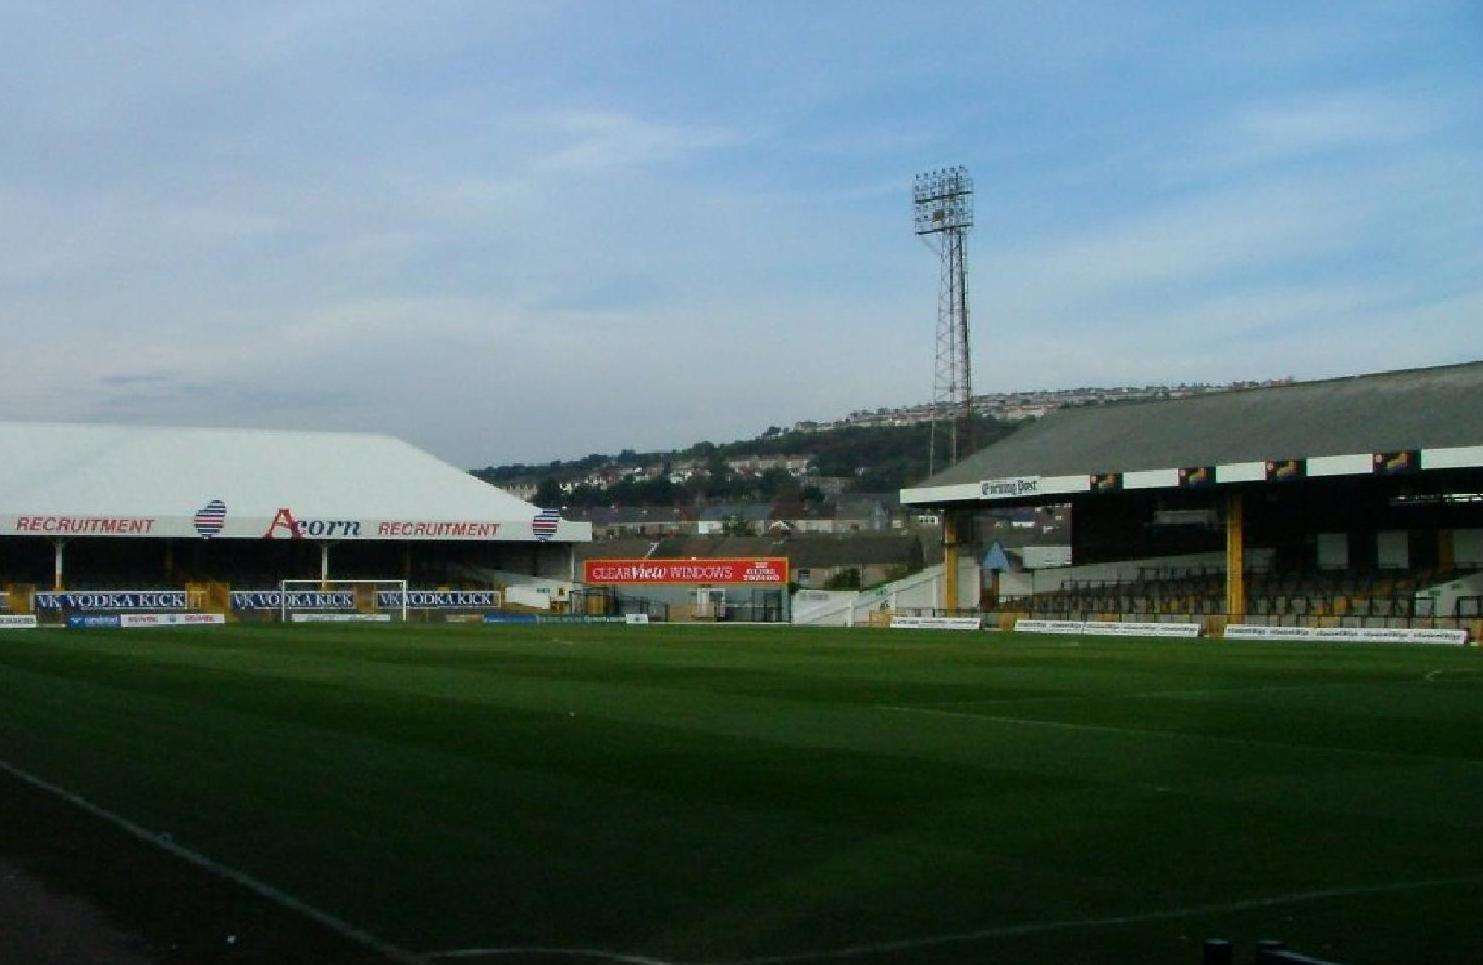 Swansea City's old Vetch Field ground where Steve Lovell watched football as a kid